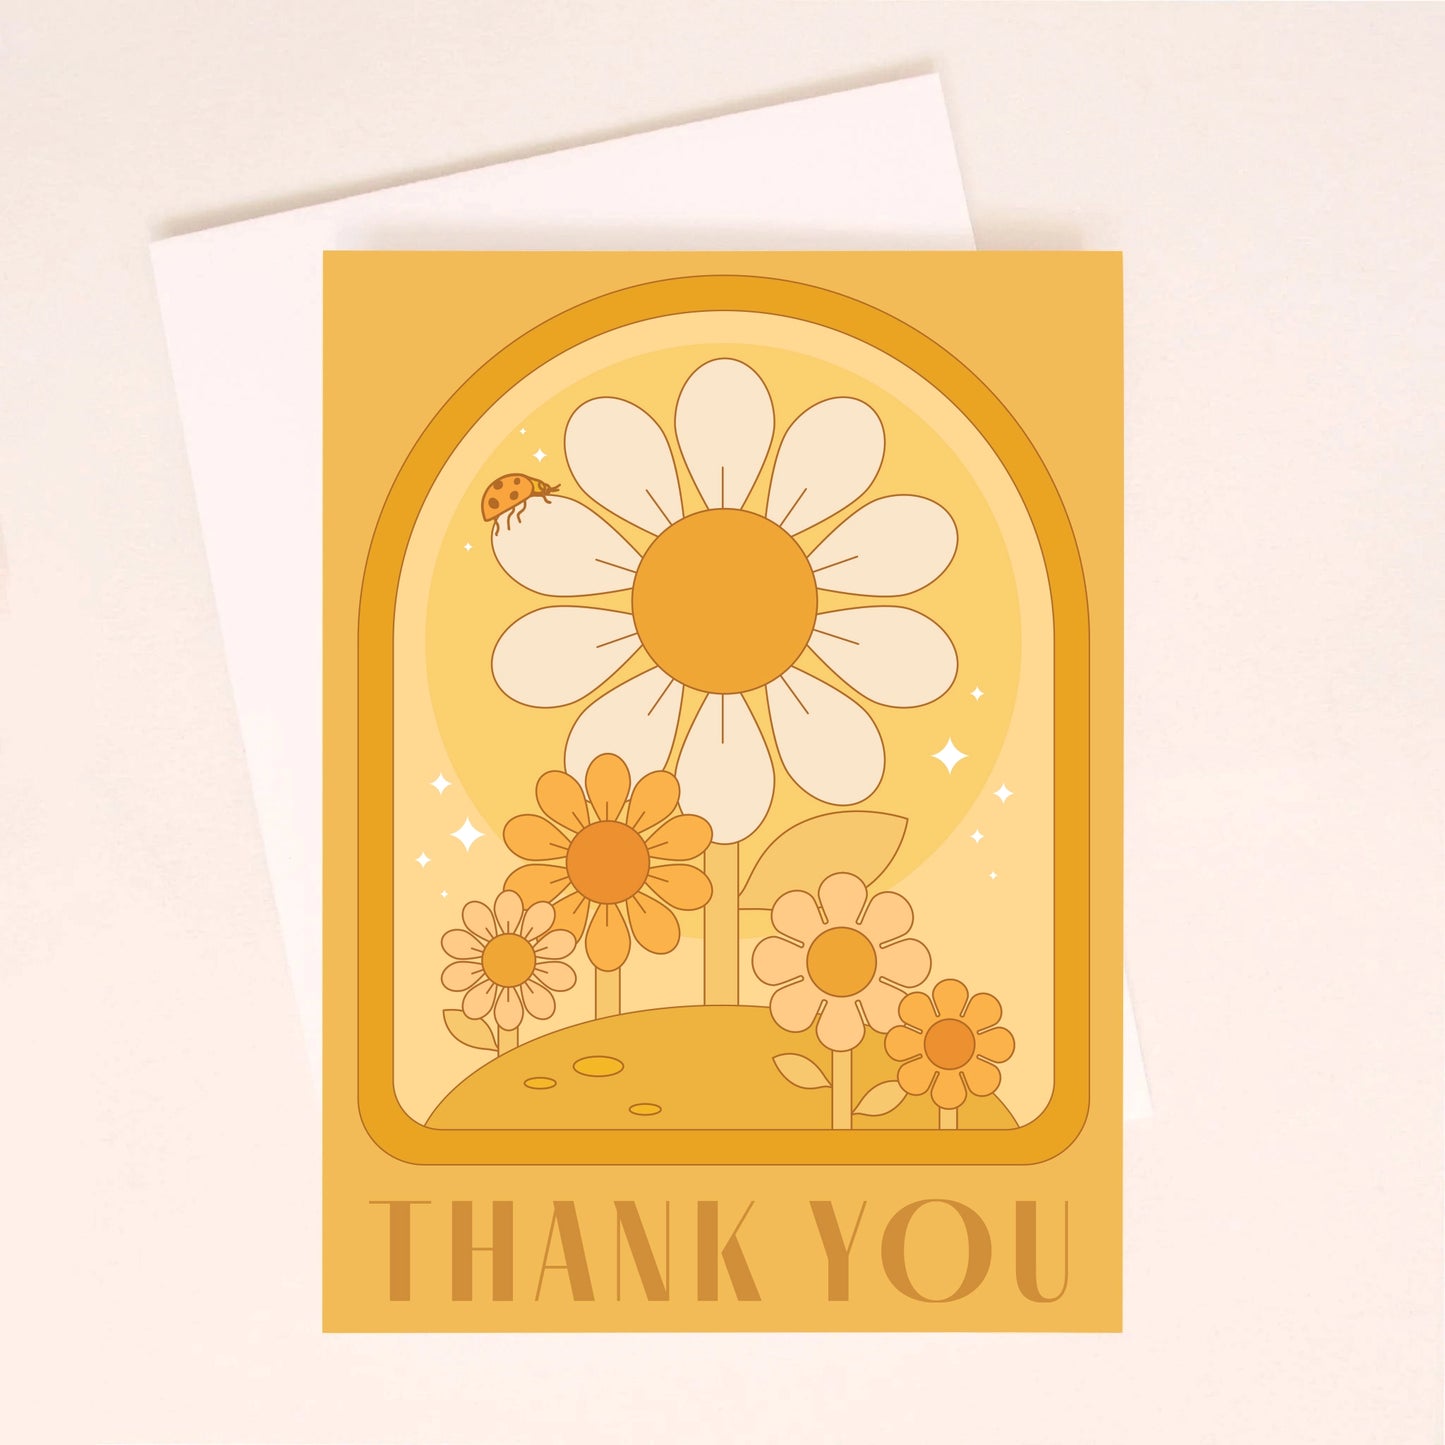 On an ivory background is an orange greeting card with an arch and daisy design with a small ladybug sitting on the largest daisy as well as dark orange text along the bottom the reads, "Thank You". 